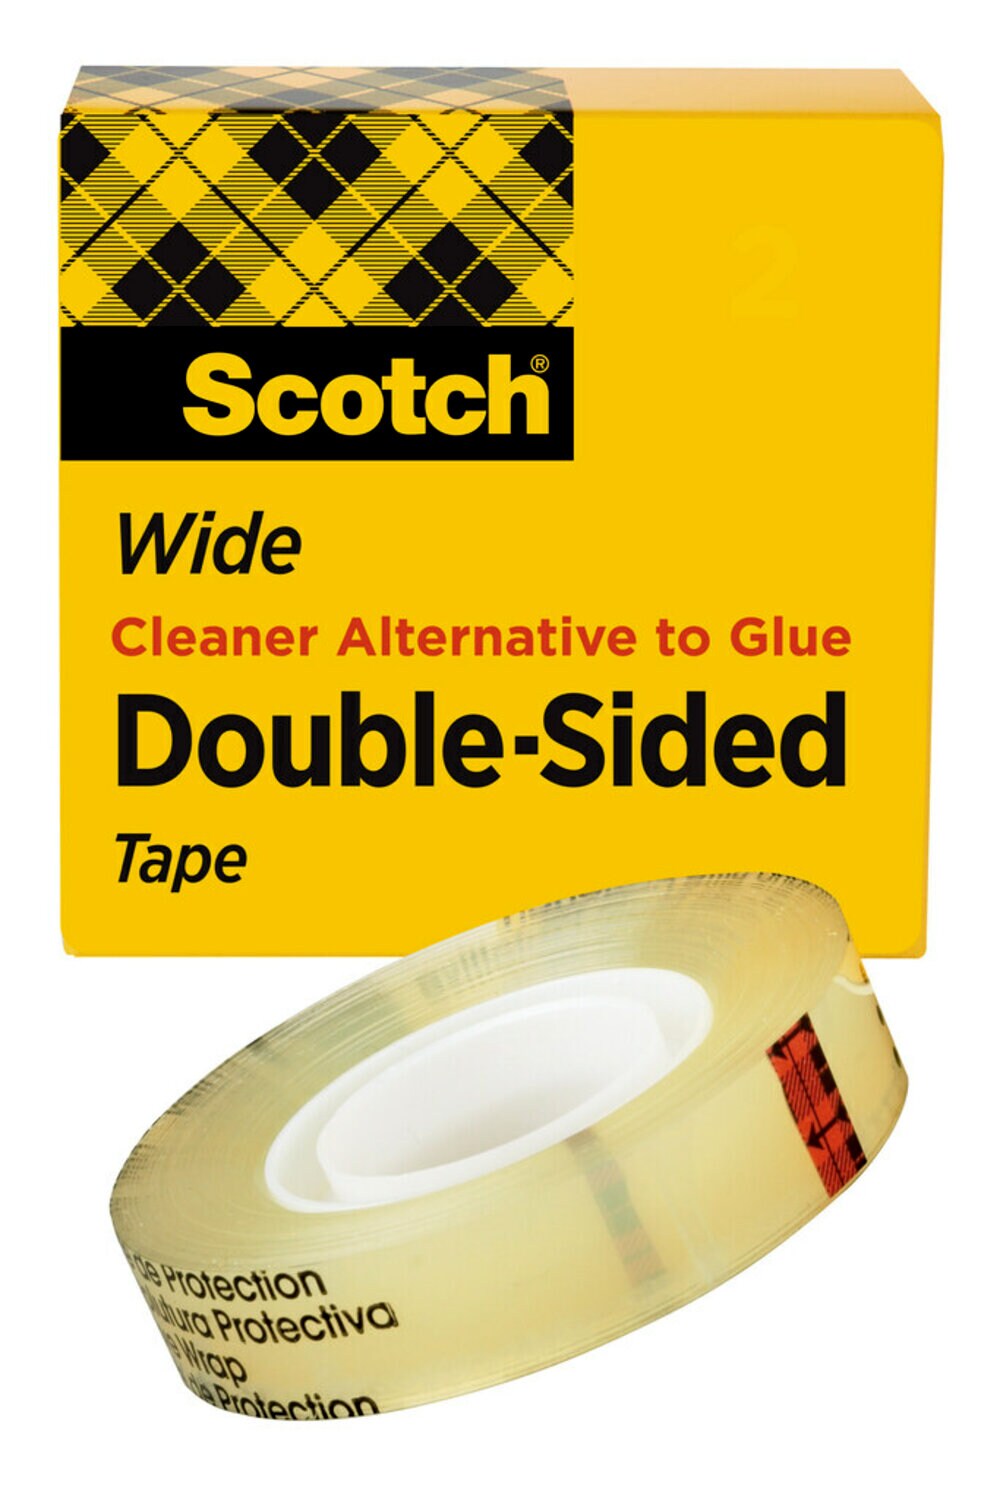 7000050038 - Scotch Double Sided Tape 665, 1 in x 1296 in Boxed